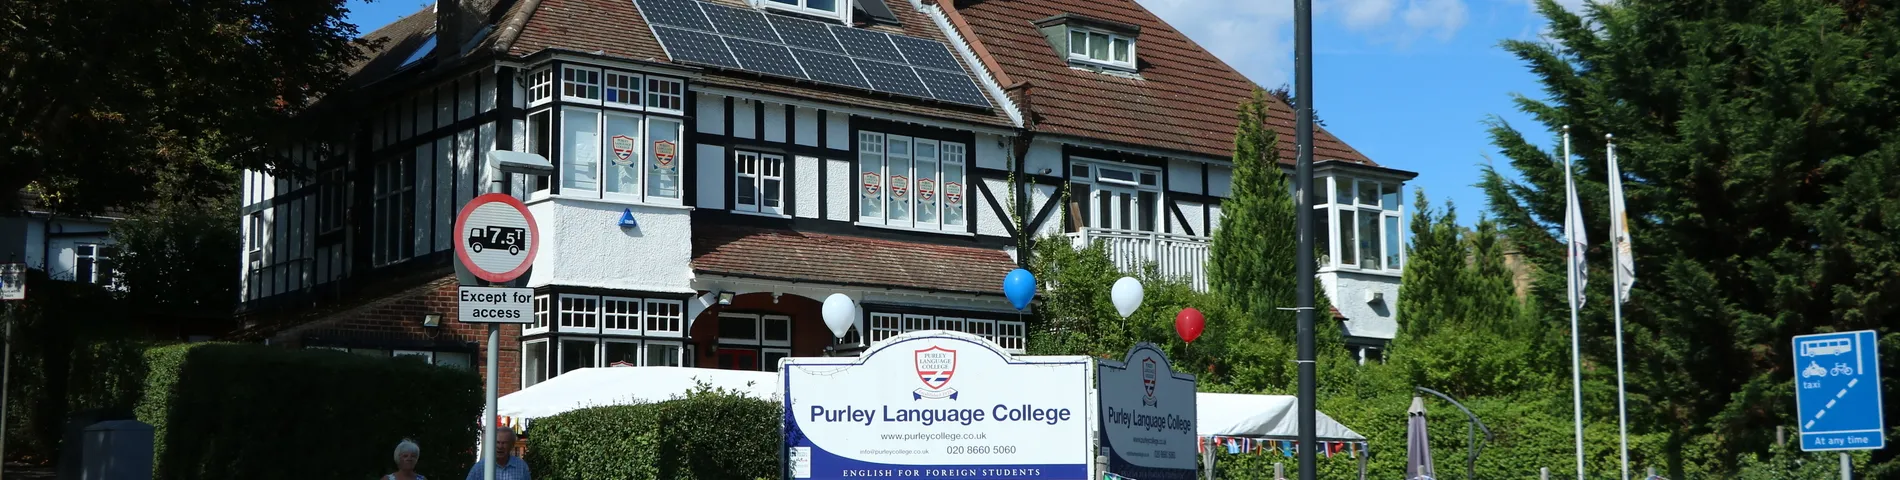 Purley Language College 사진 1